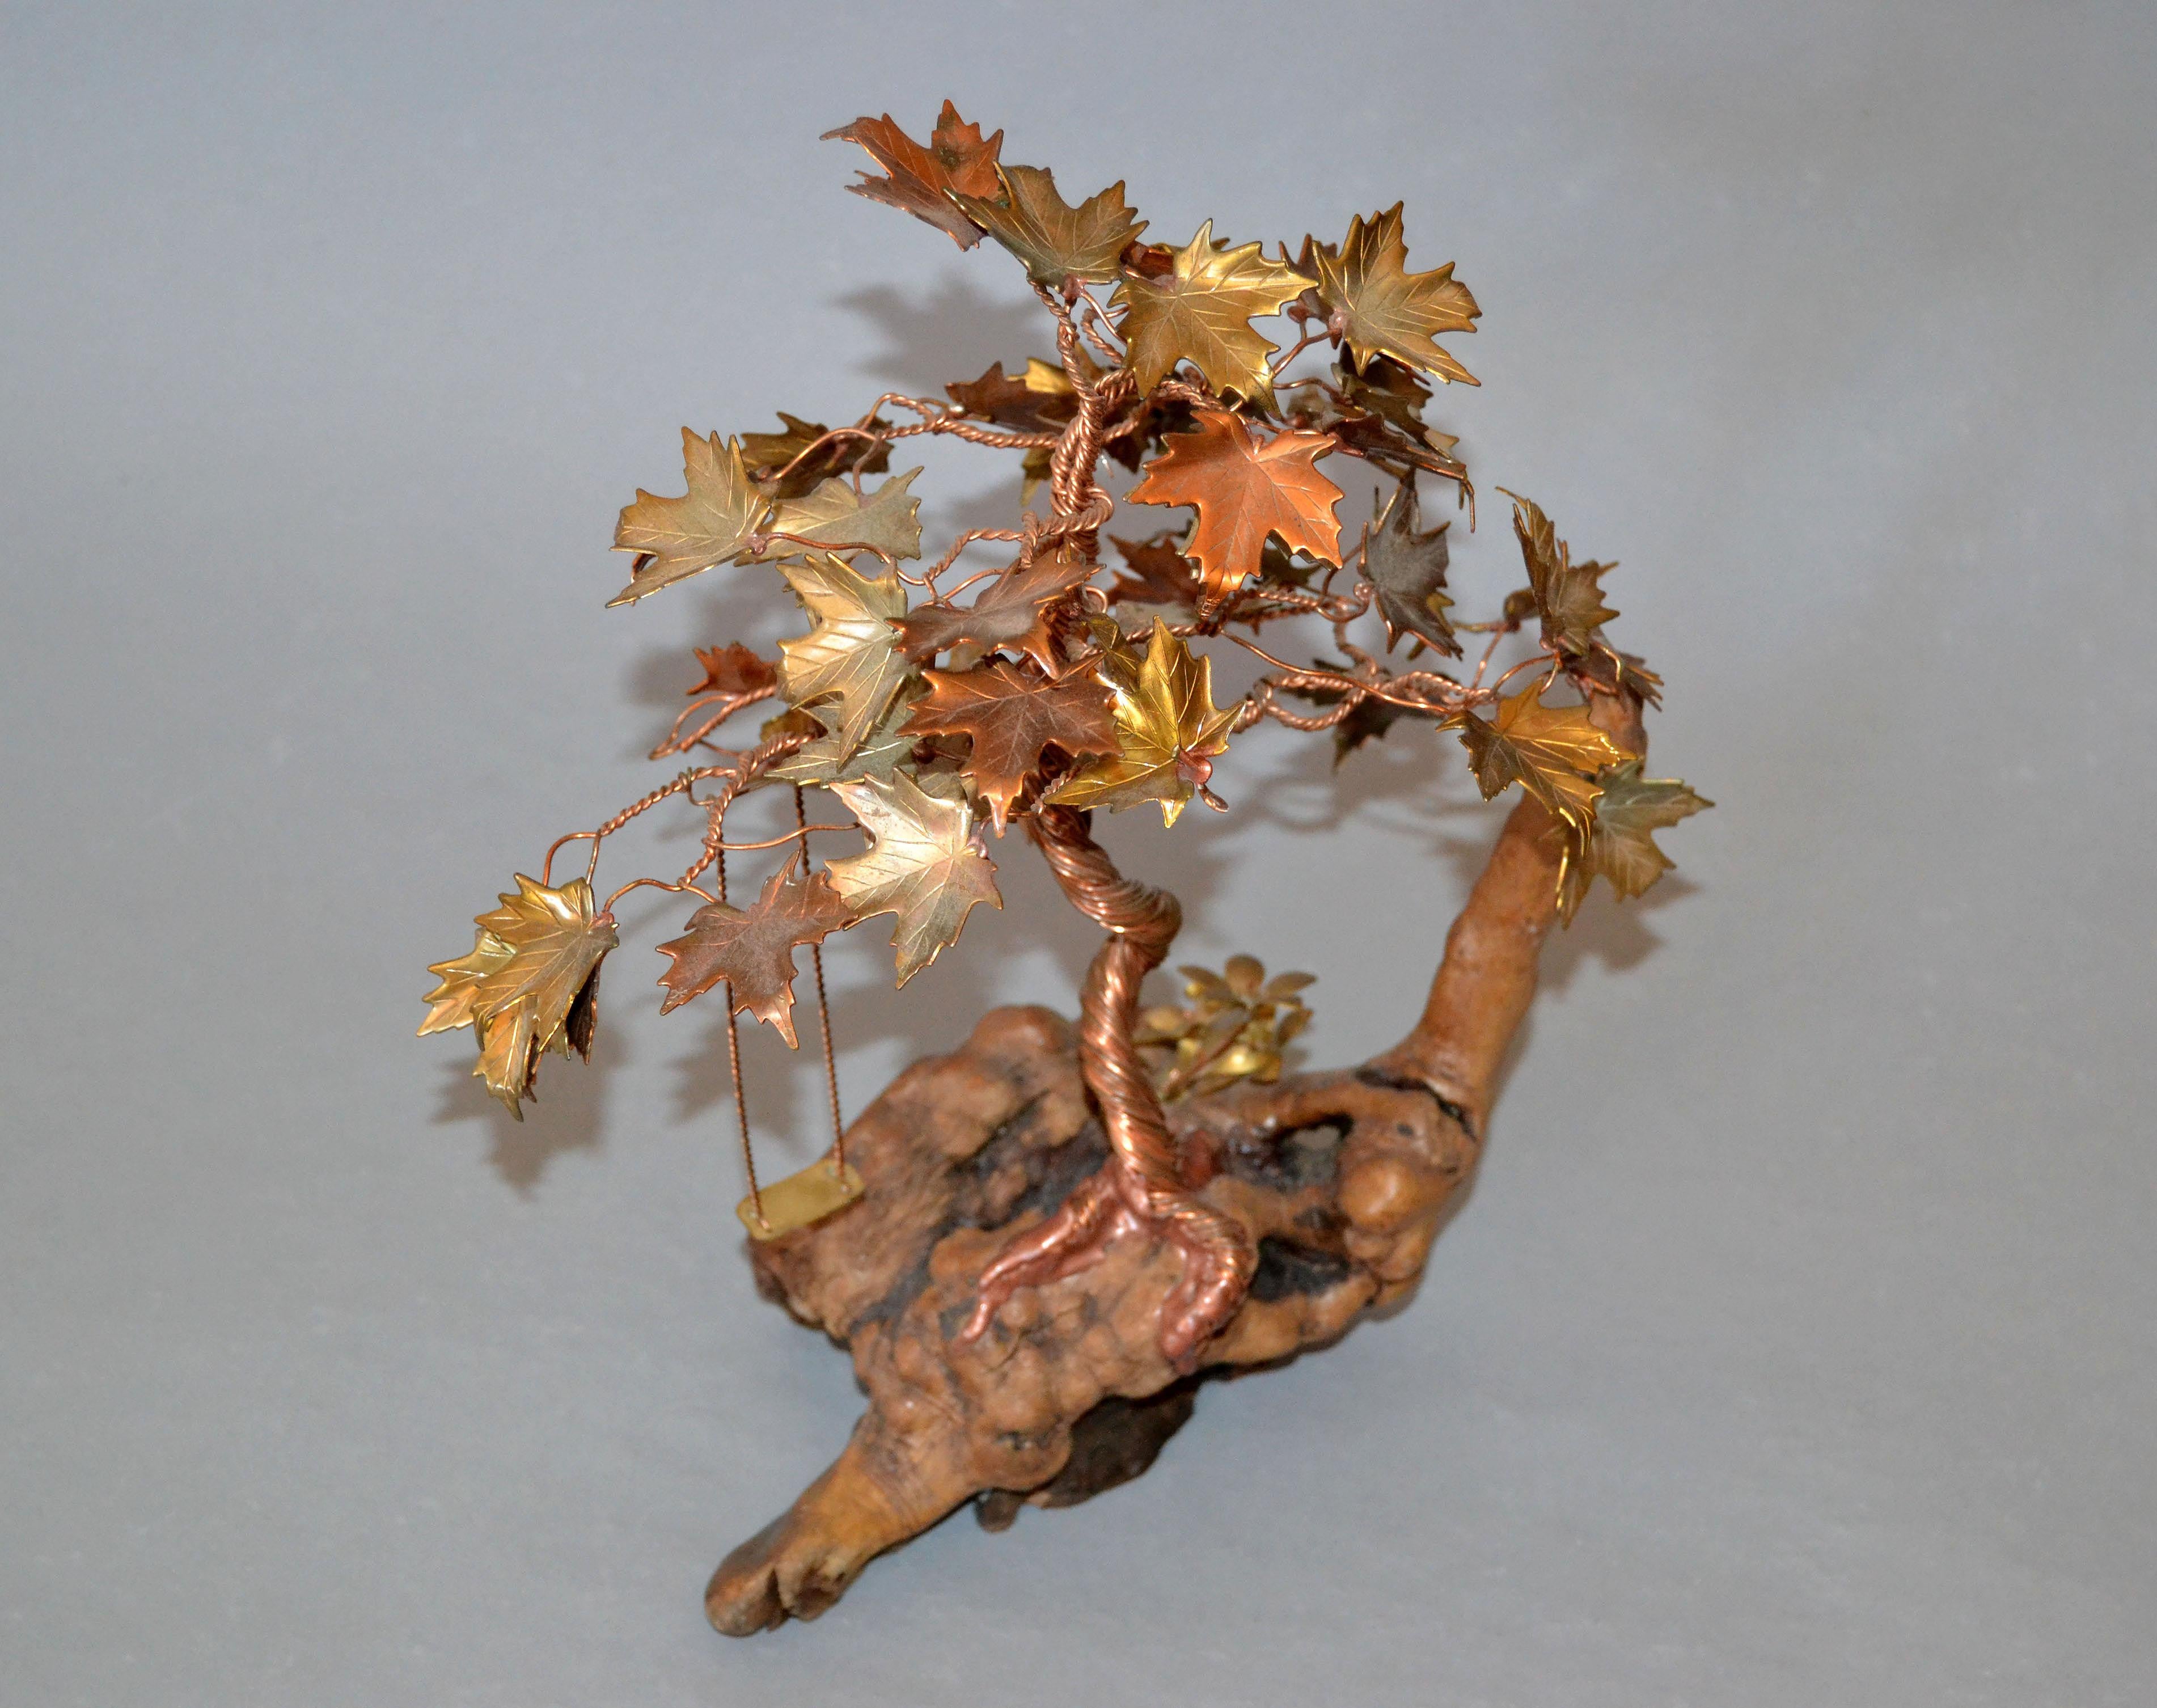 American Handcrafted Bonsai Tree Sculpture in Brass Copper Bronze on a Burl Wood Base For Sale